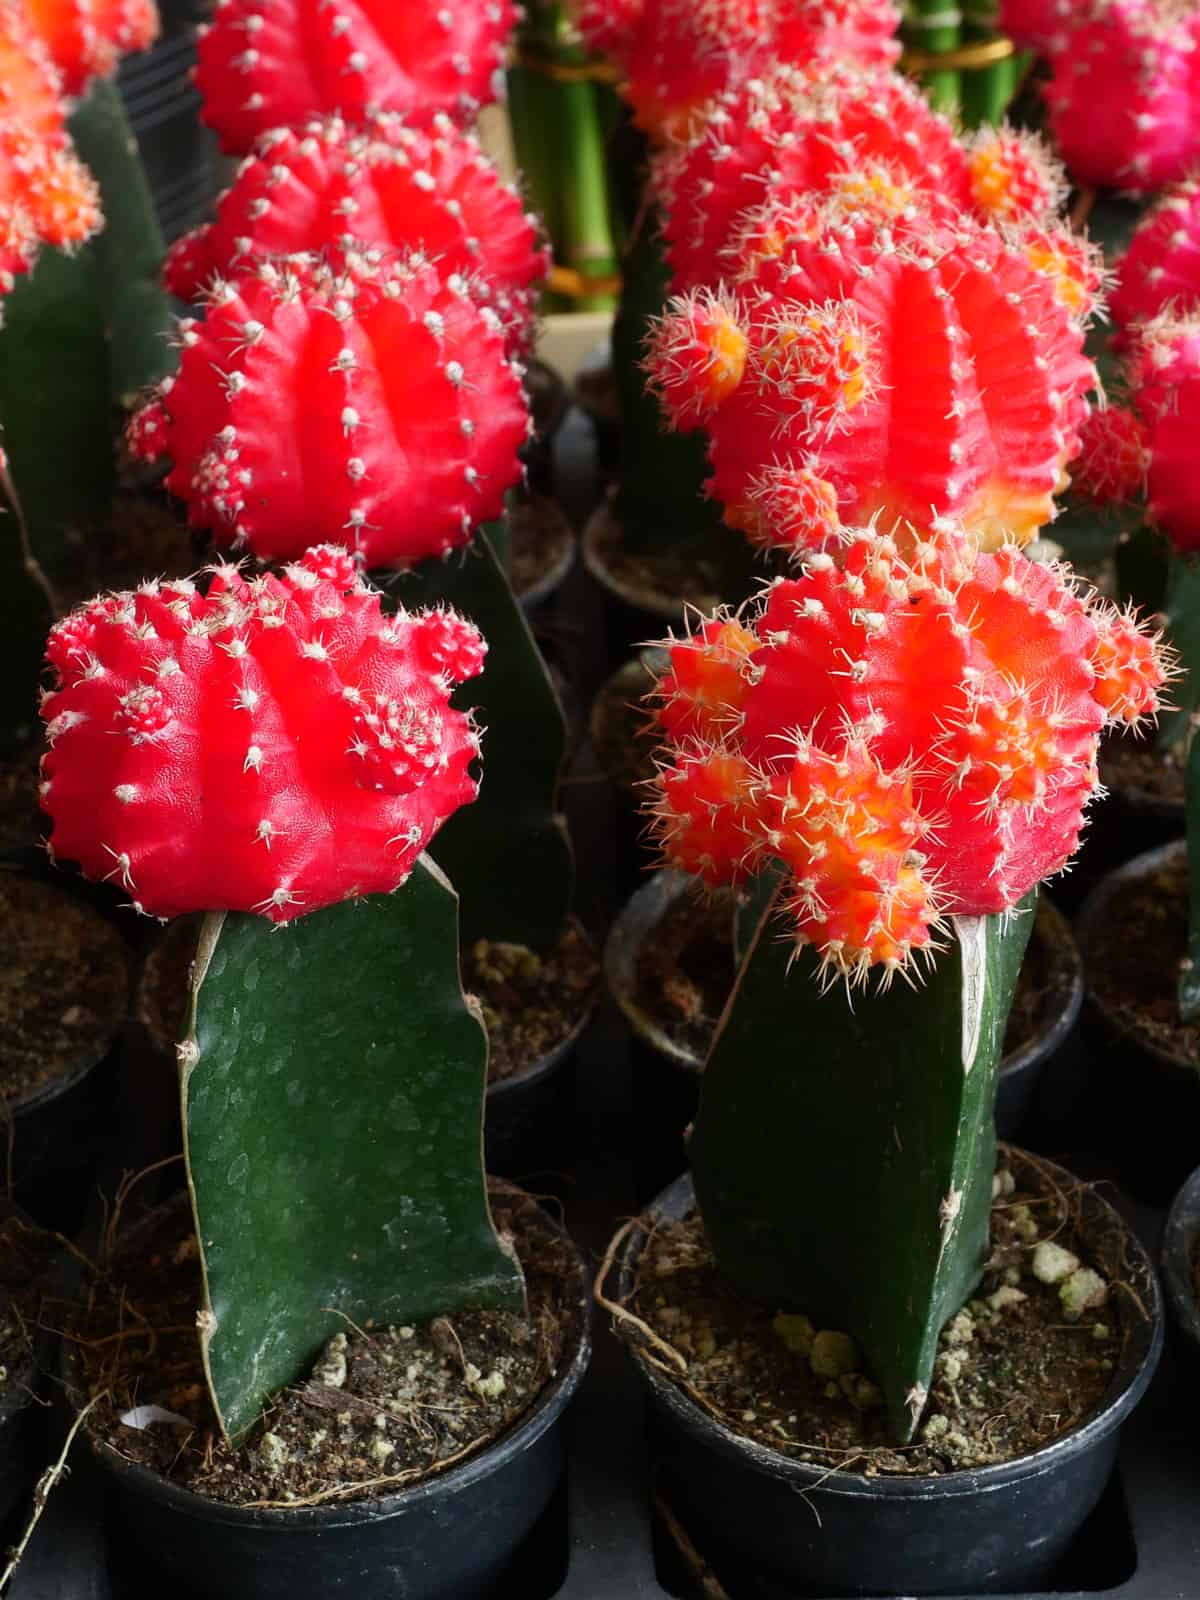 Blooming bright red moon cactus in a small plantation